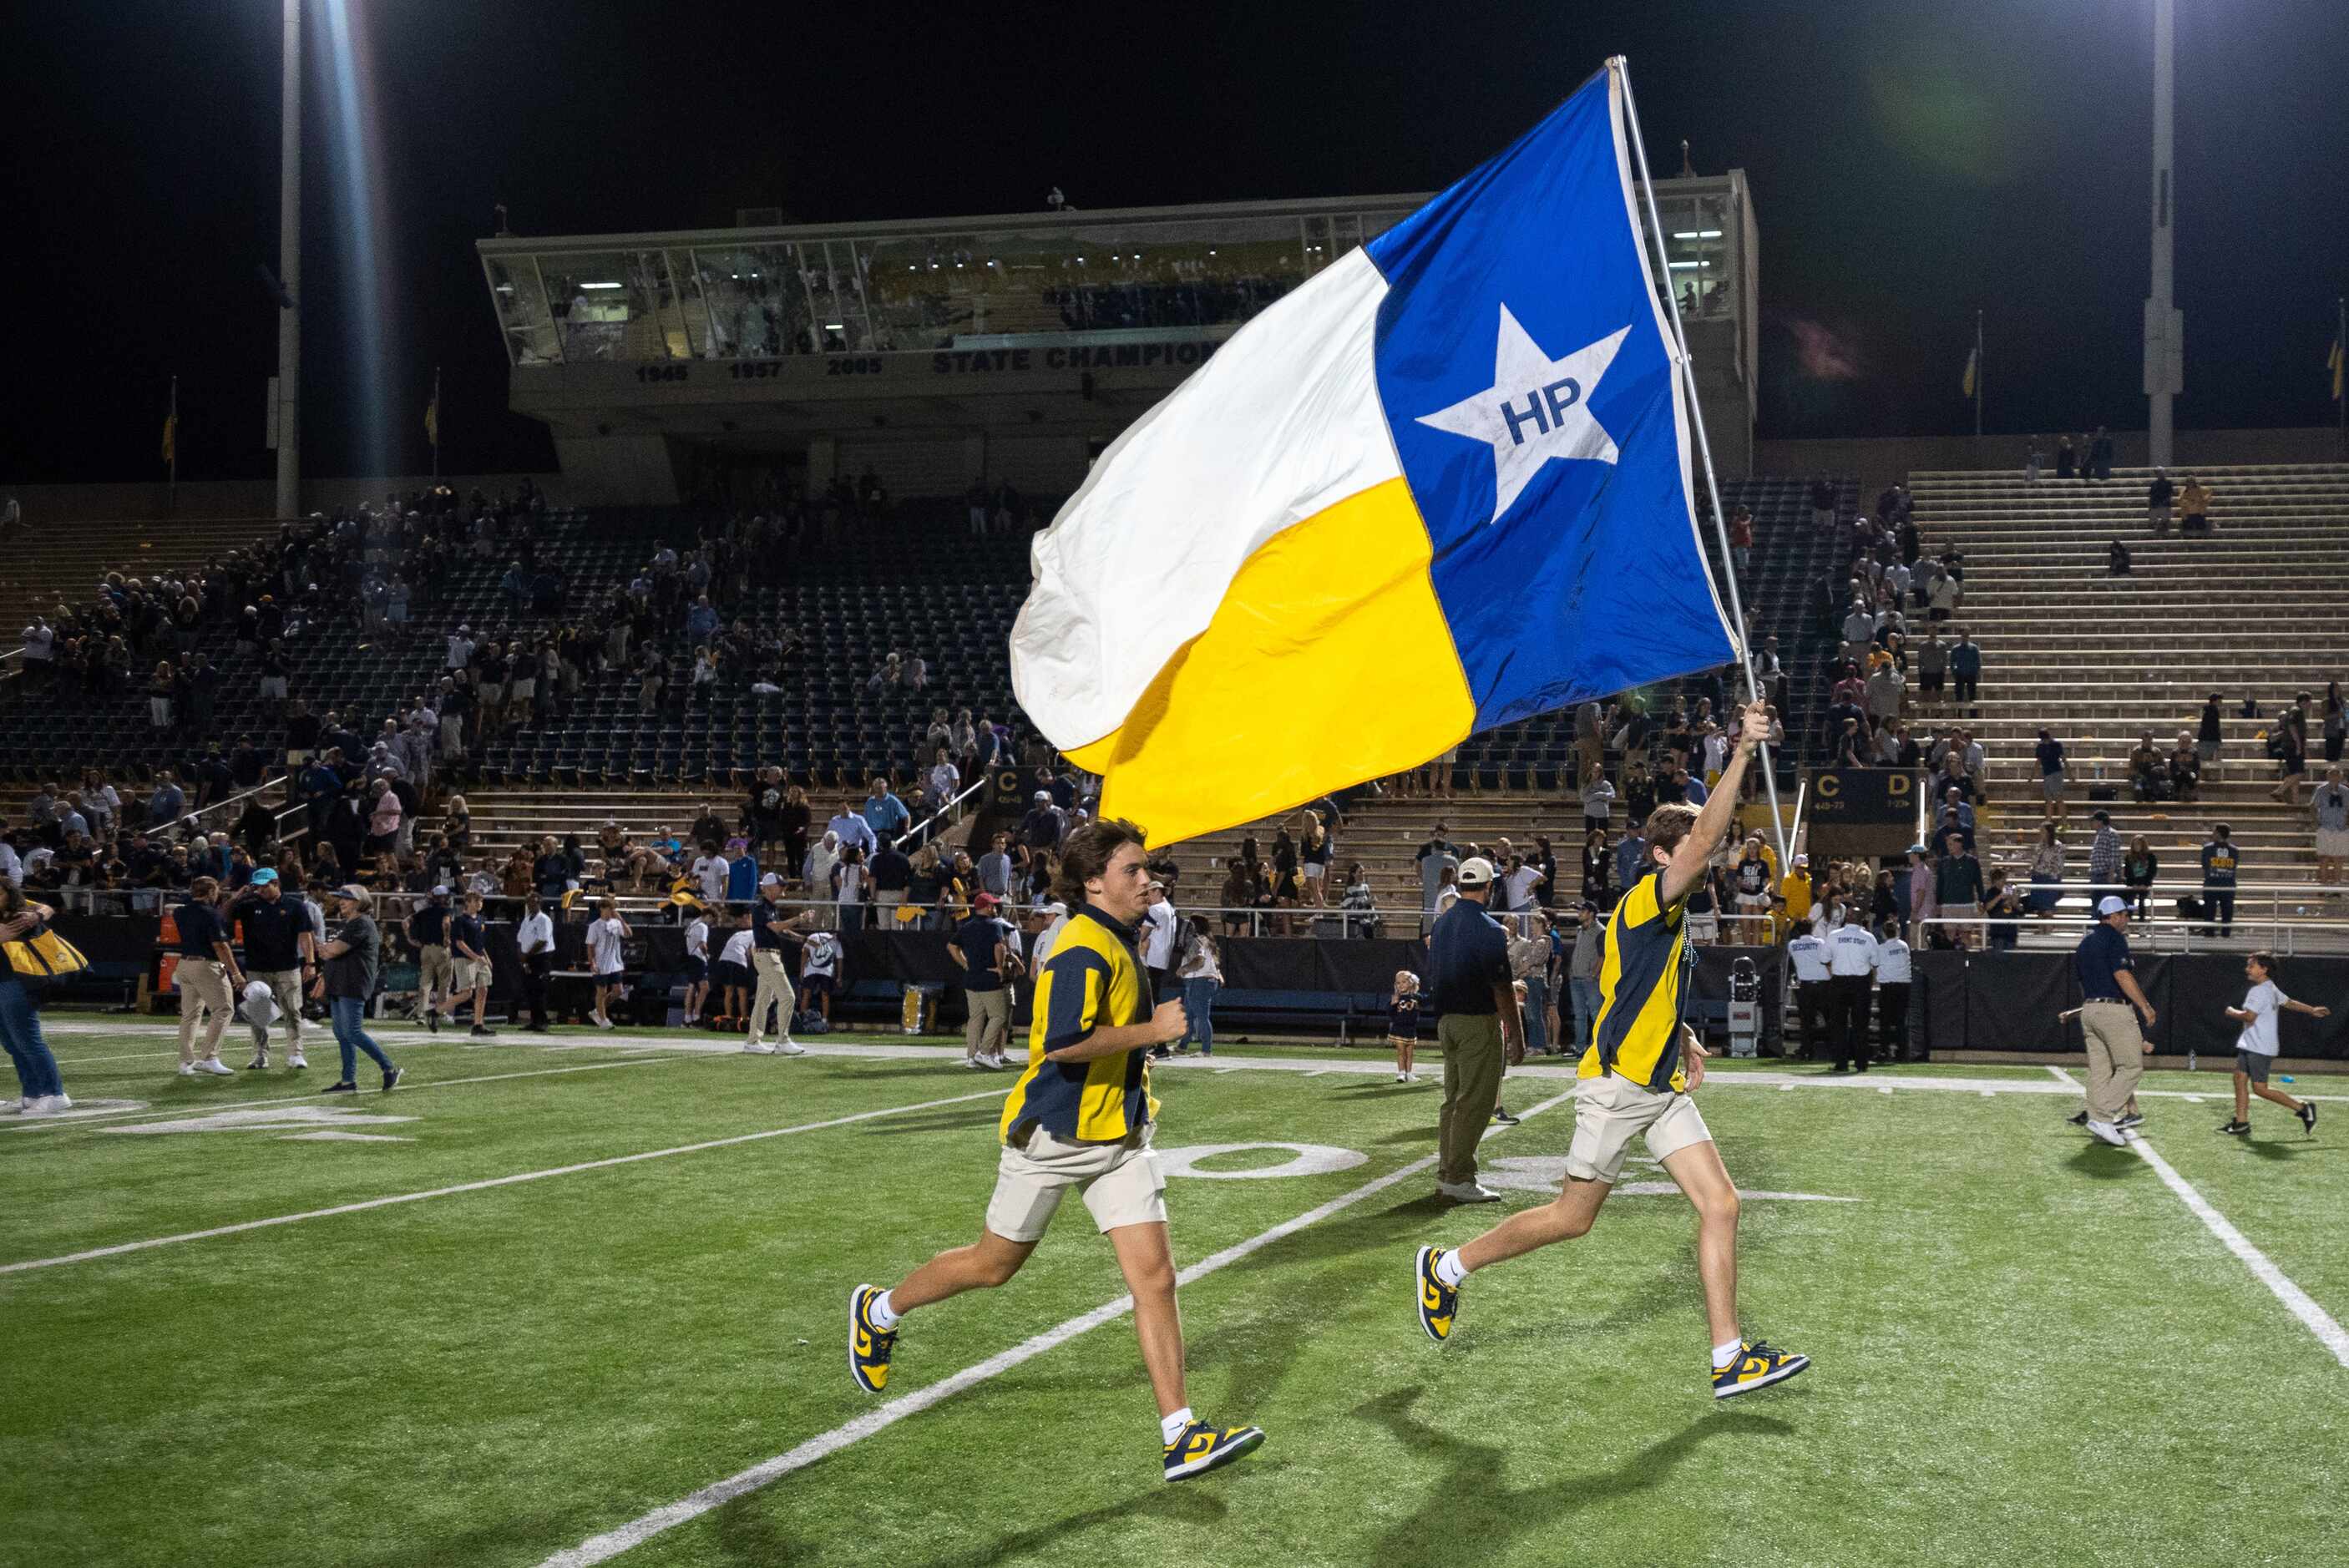 Highland Park students wave the HP flag as they celebrate a victory over Jesuit 35 to 28 at...